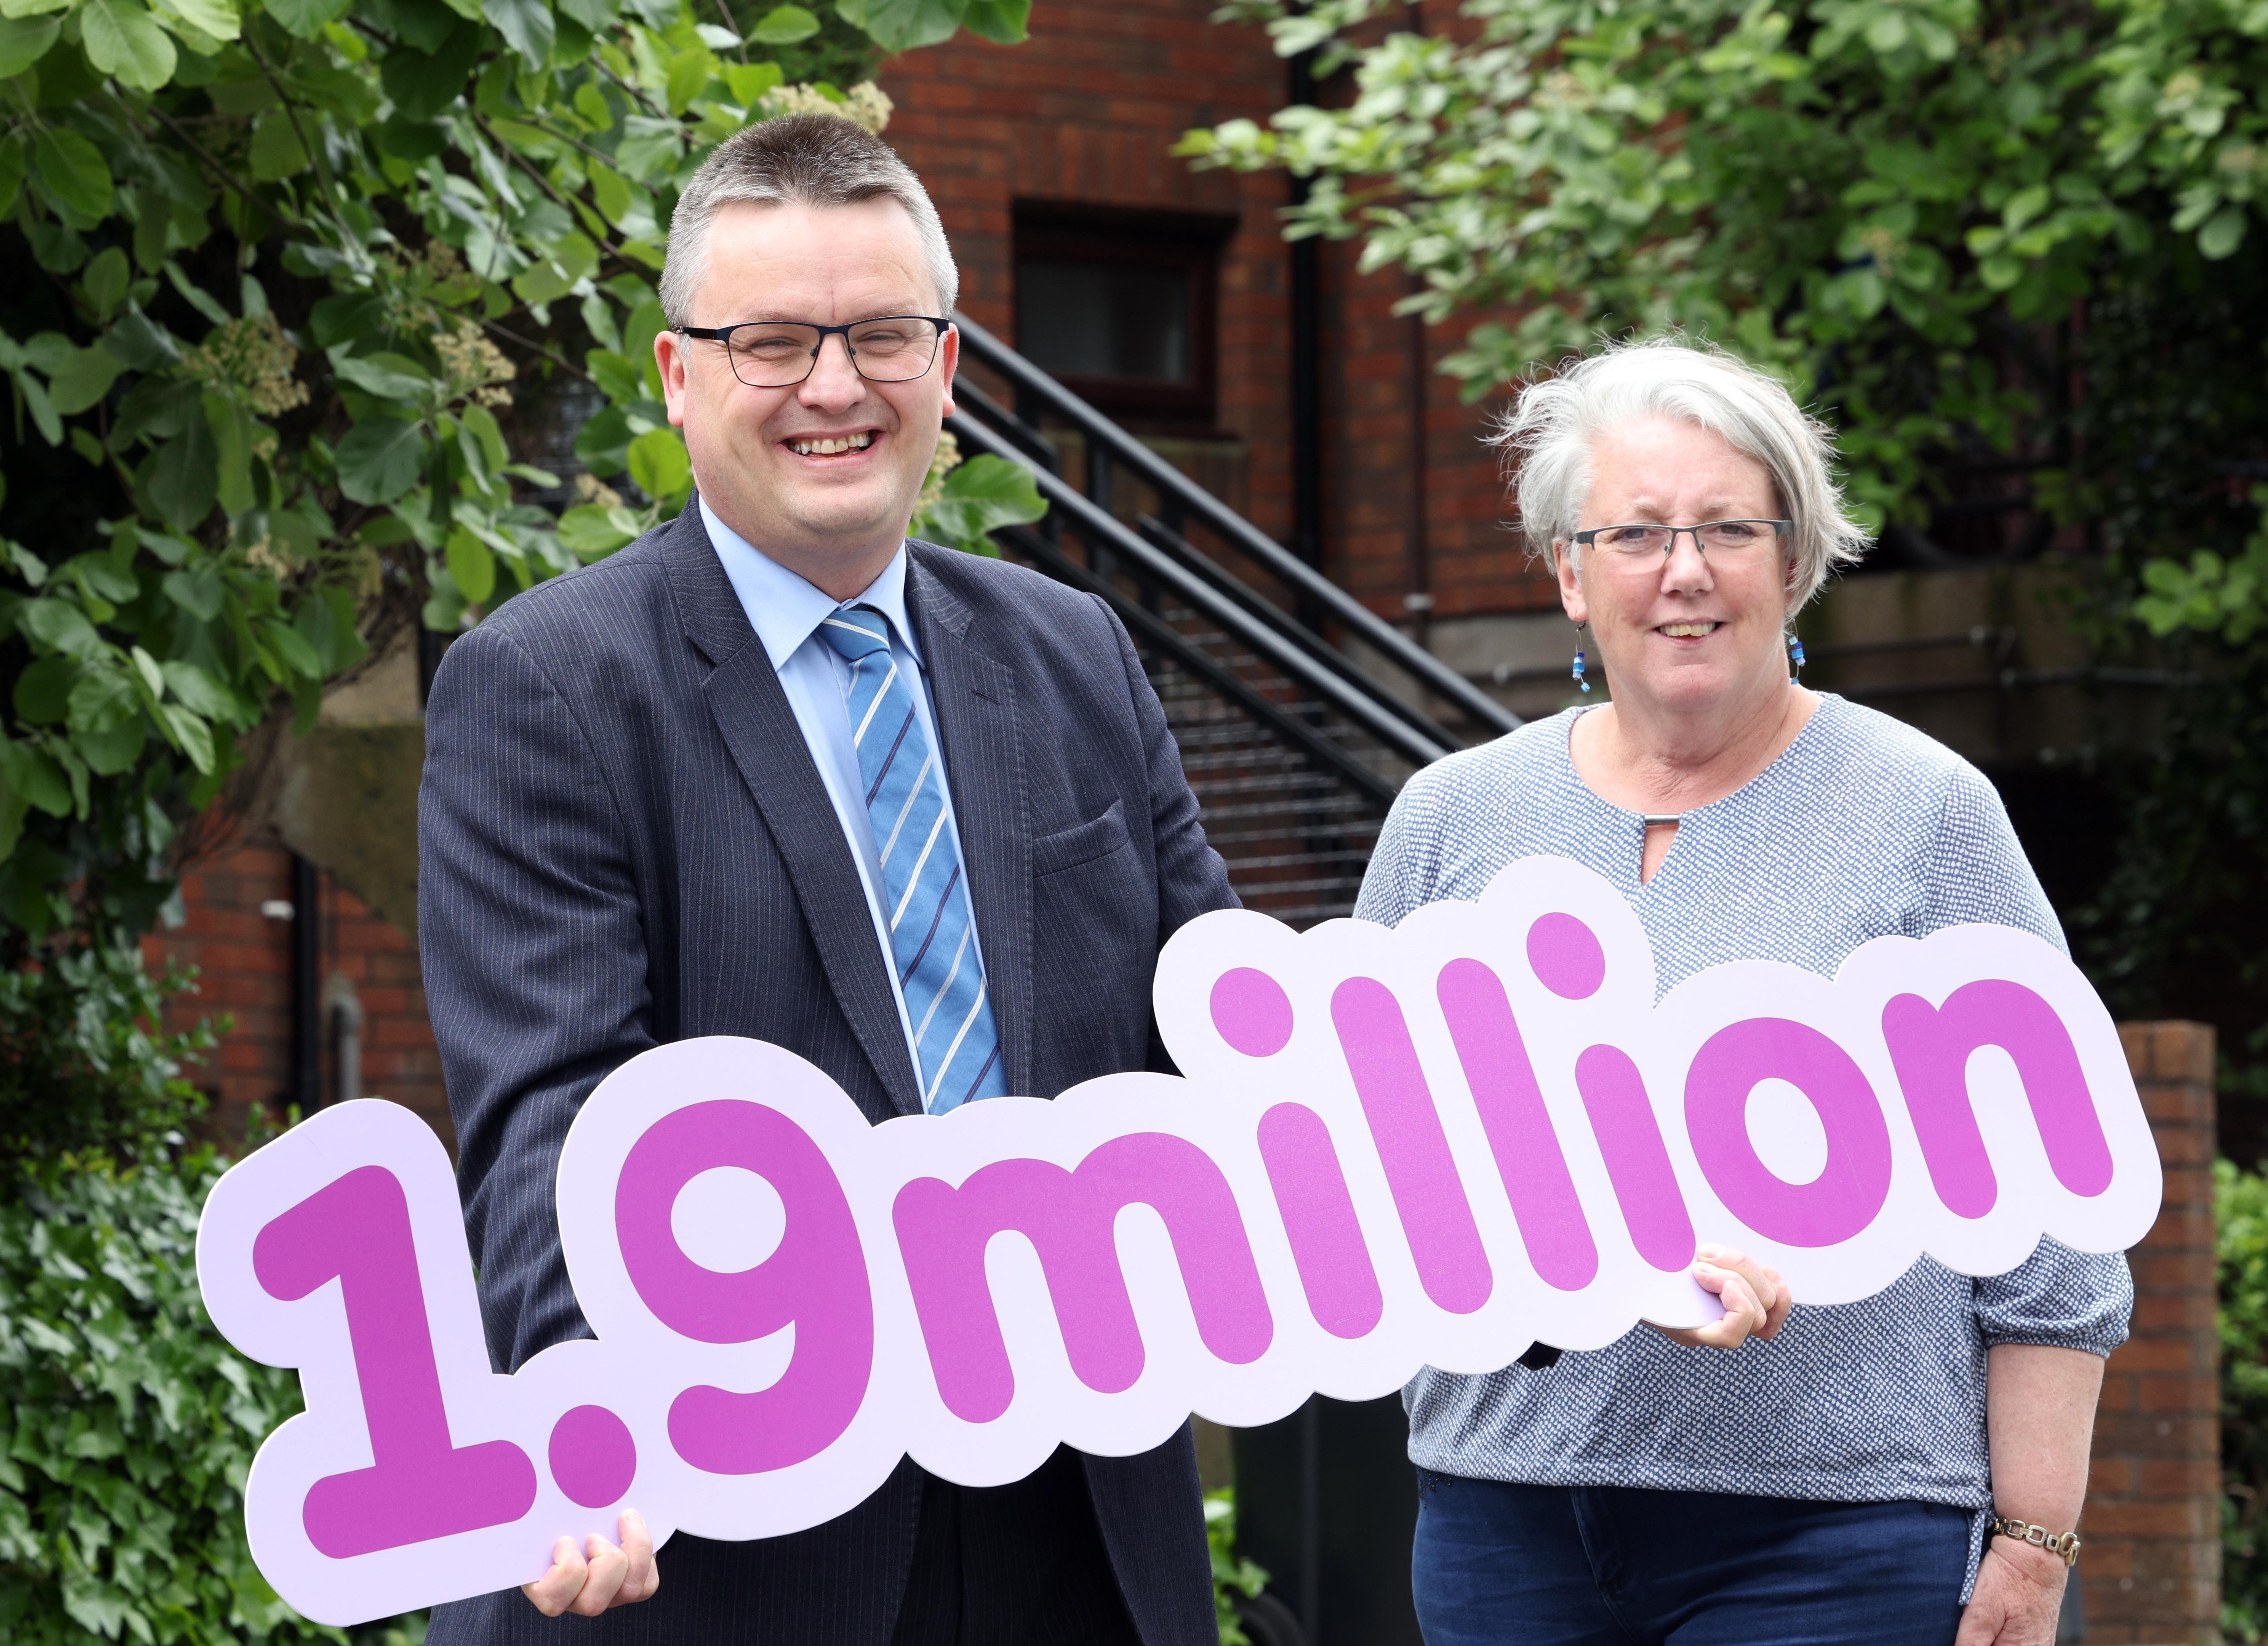 POPULATION: Dr David Marshall, Director of Census and Population Statistics and Siobhan Carey, NISRA Chief Executive and Registrar General announce the first results from the 2021 Census